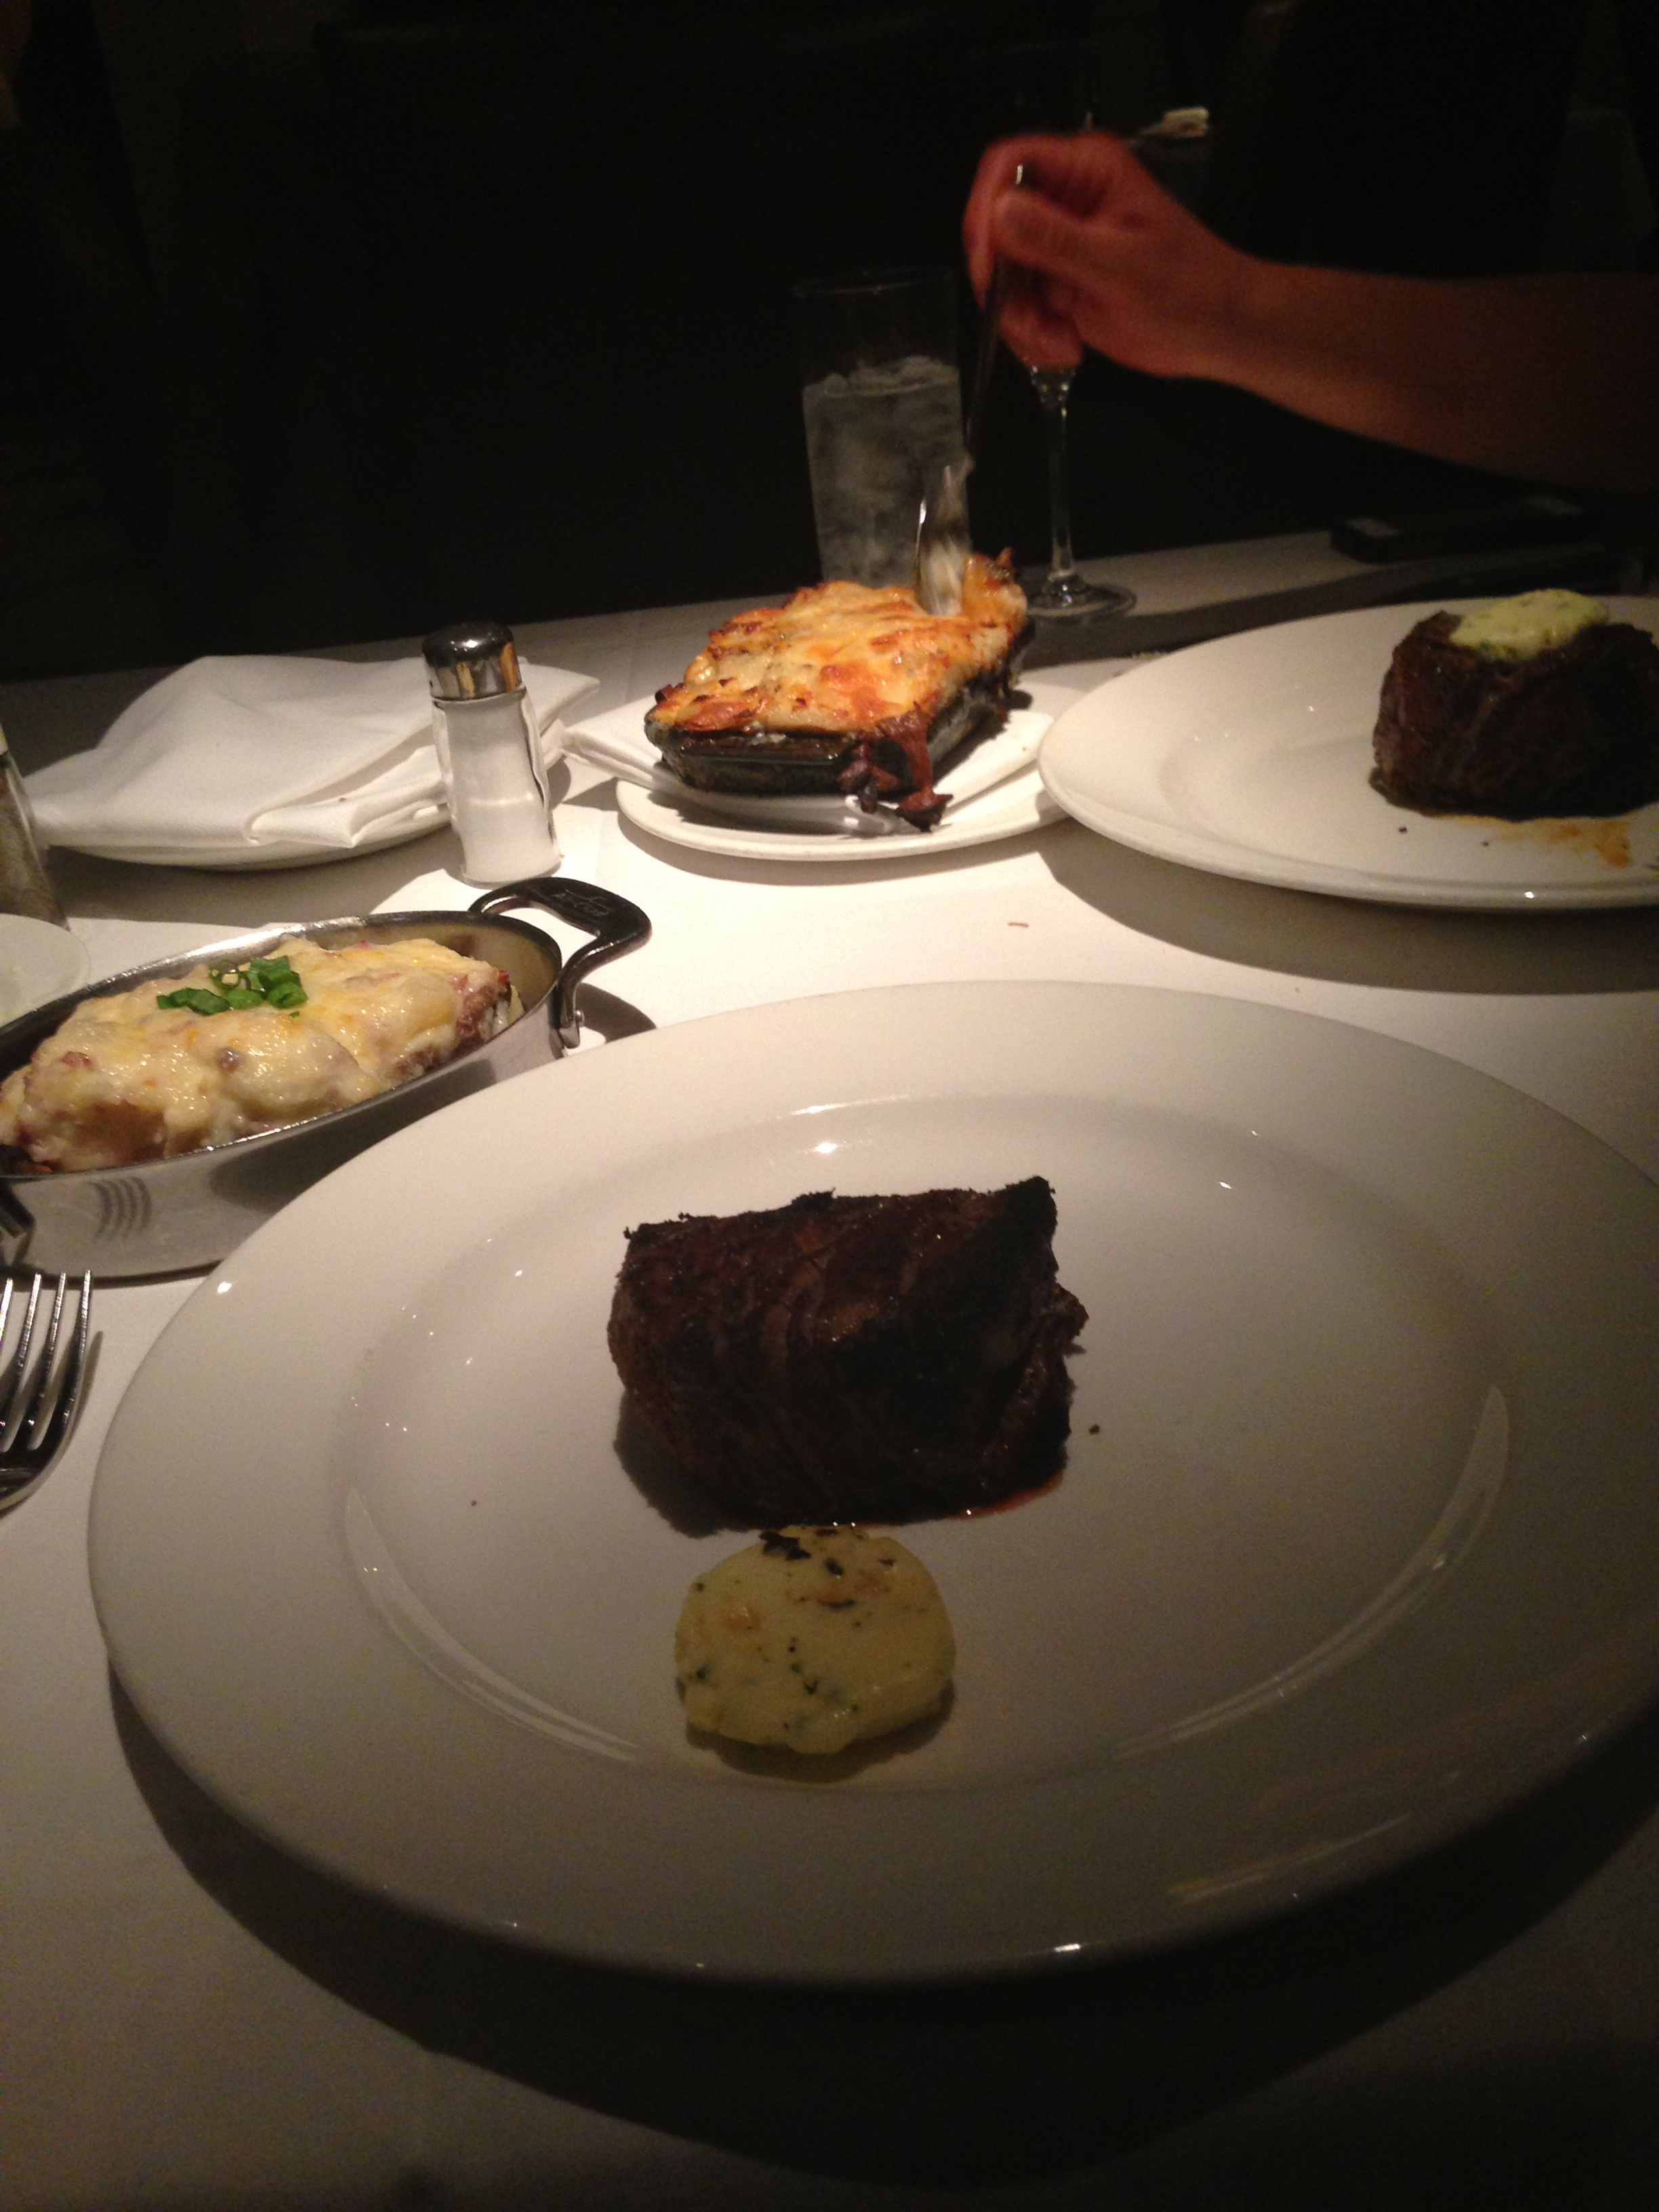 A look at our food at Delmonico Steakhouse.